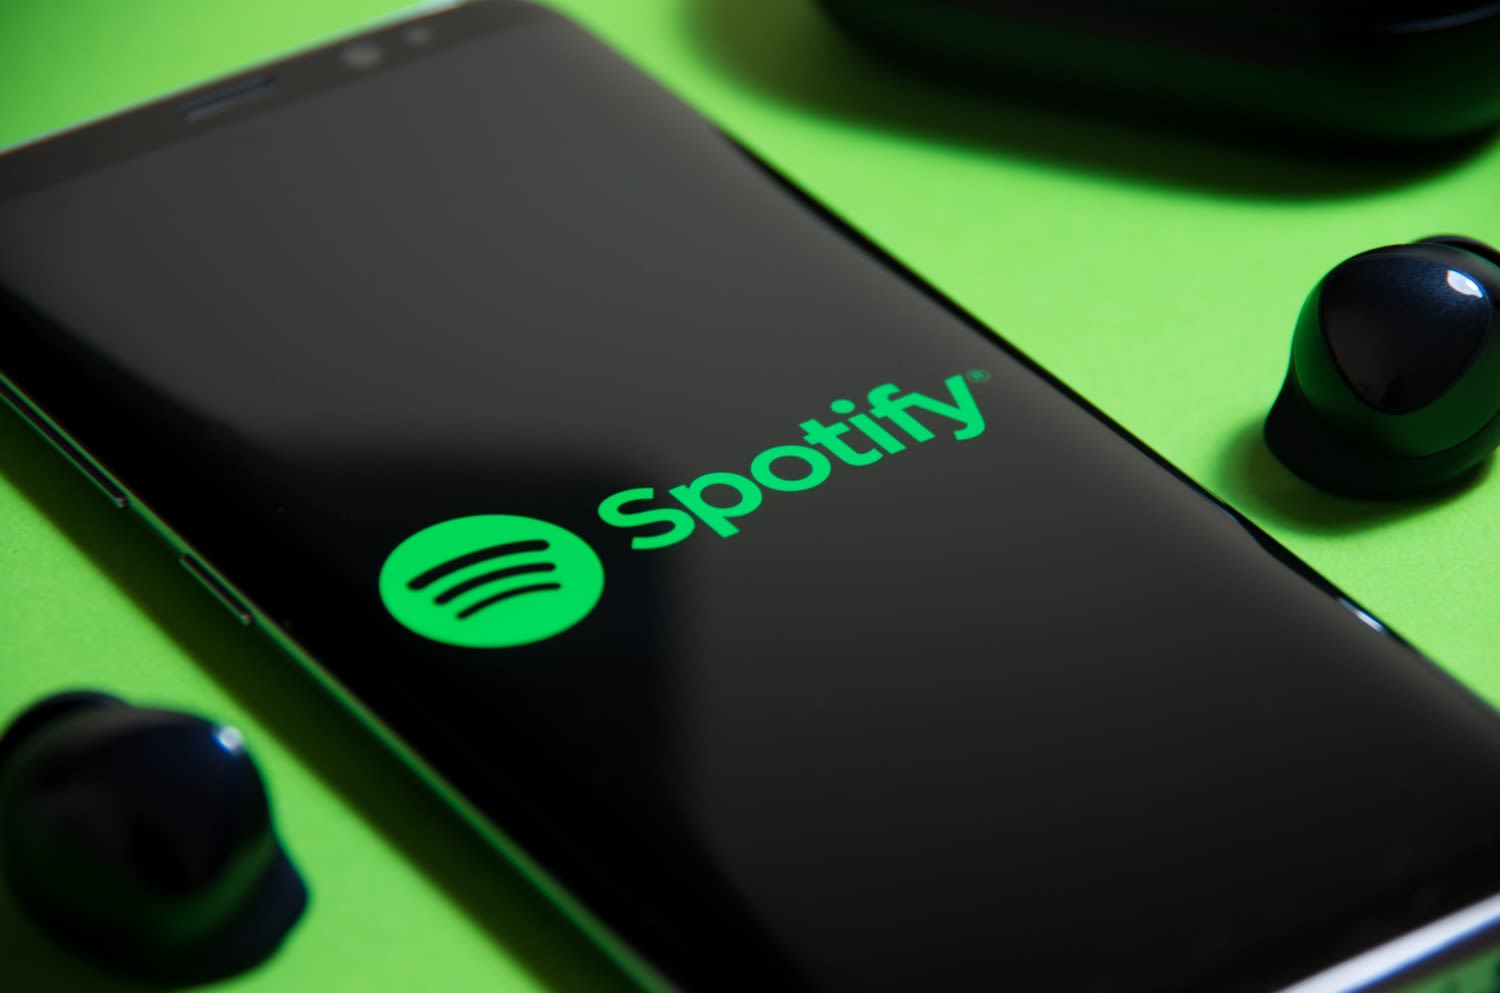 Spotify expected to pay out $150M less to musicians after new price increase